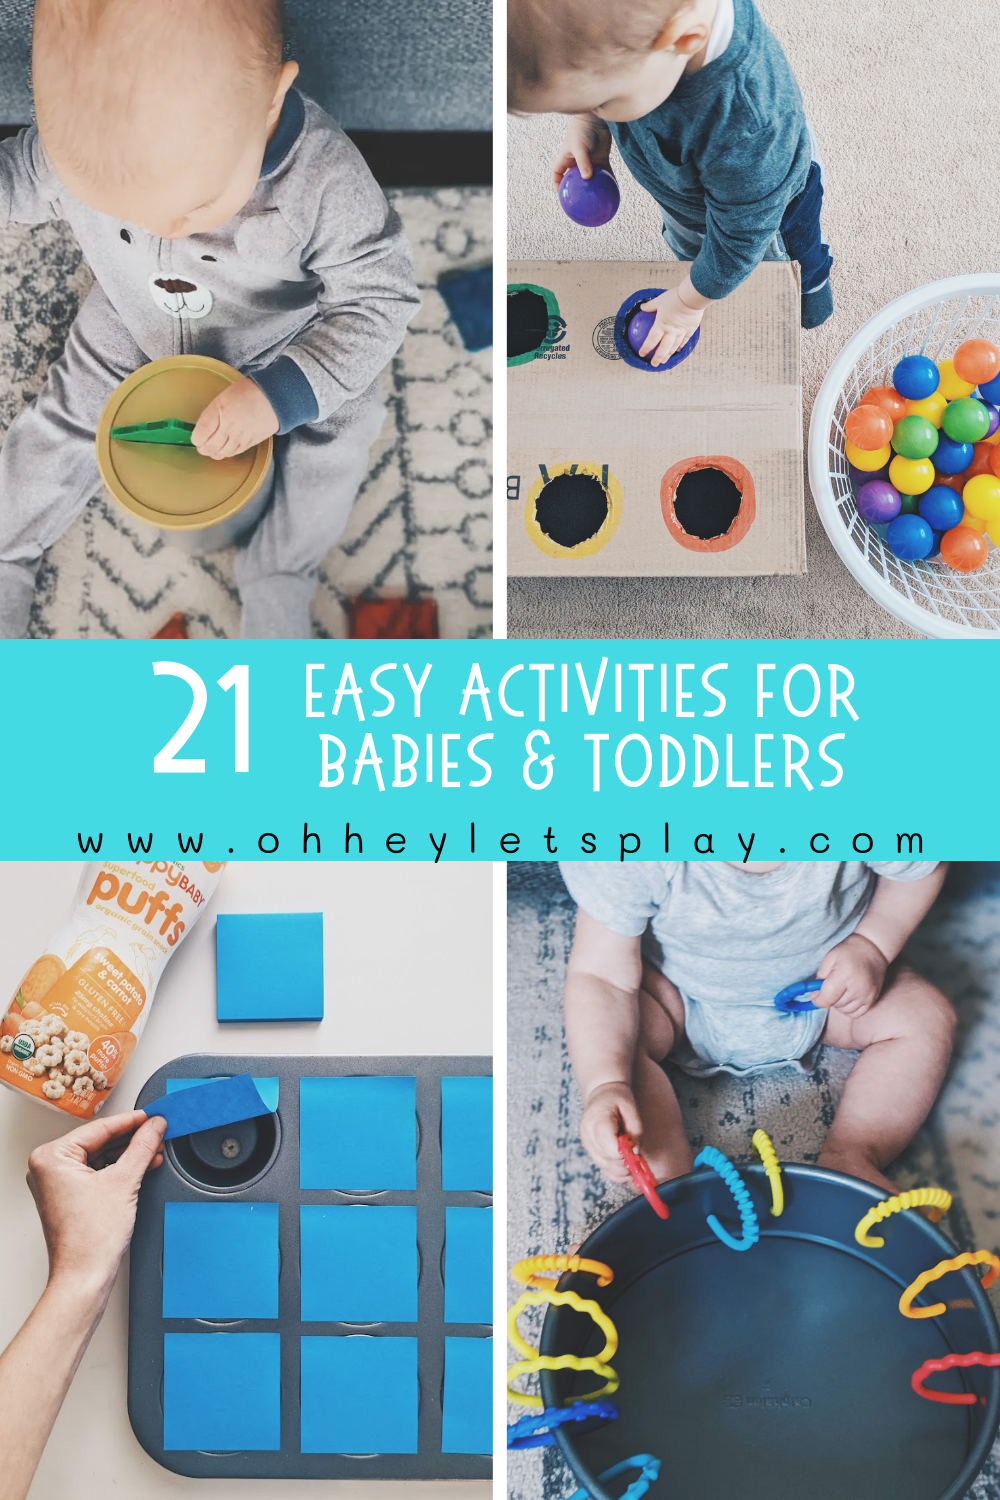 21 Easy Activities for Babies & Toddlers — Oh Hey Let's Play